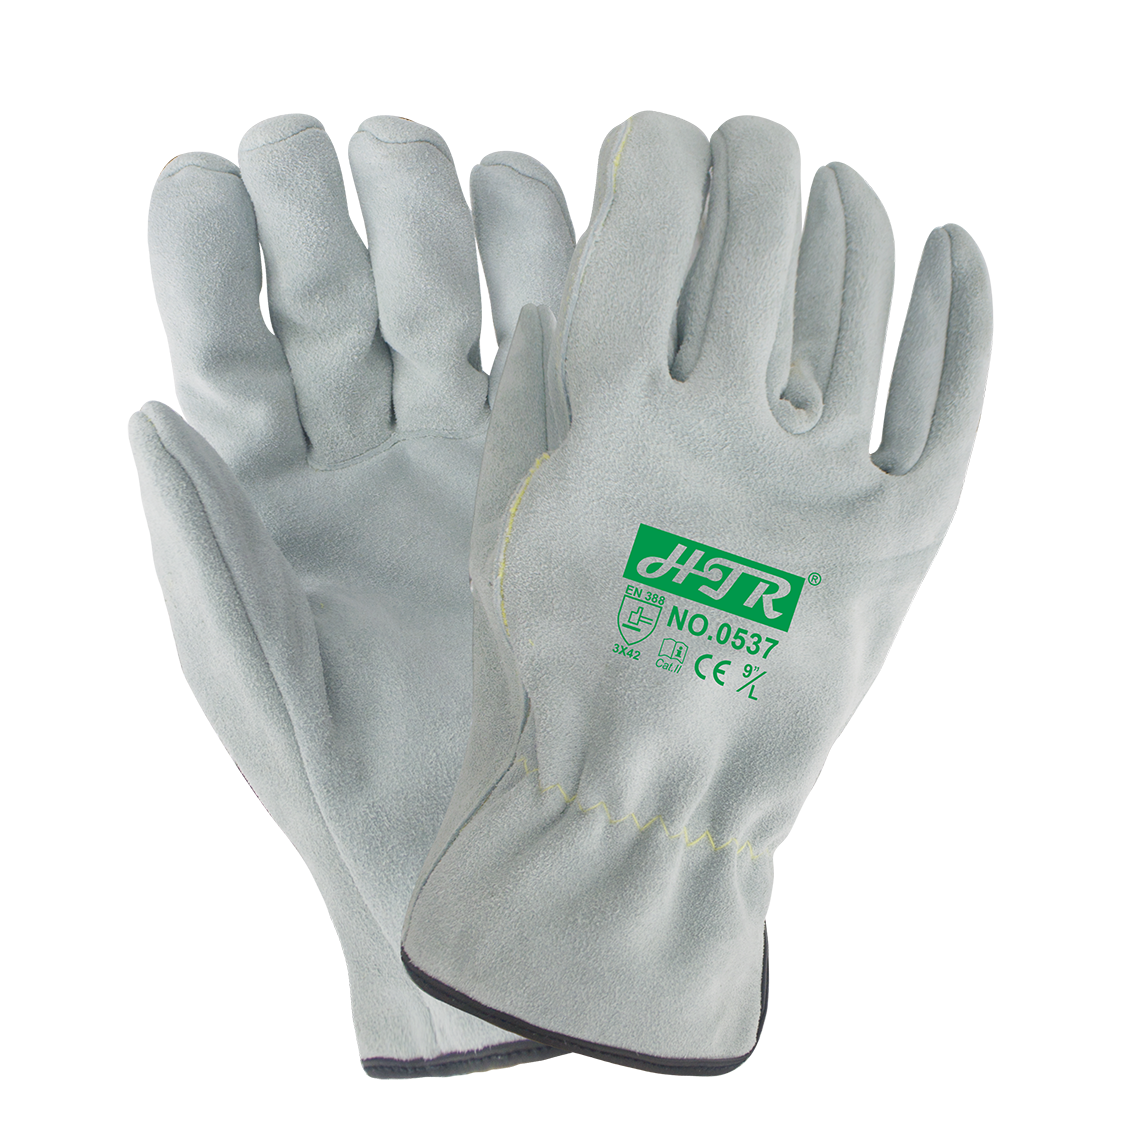 Genuine leather durable gloves